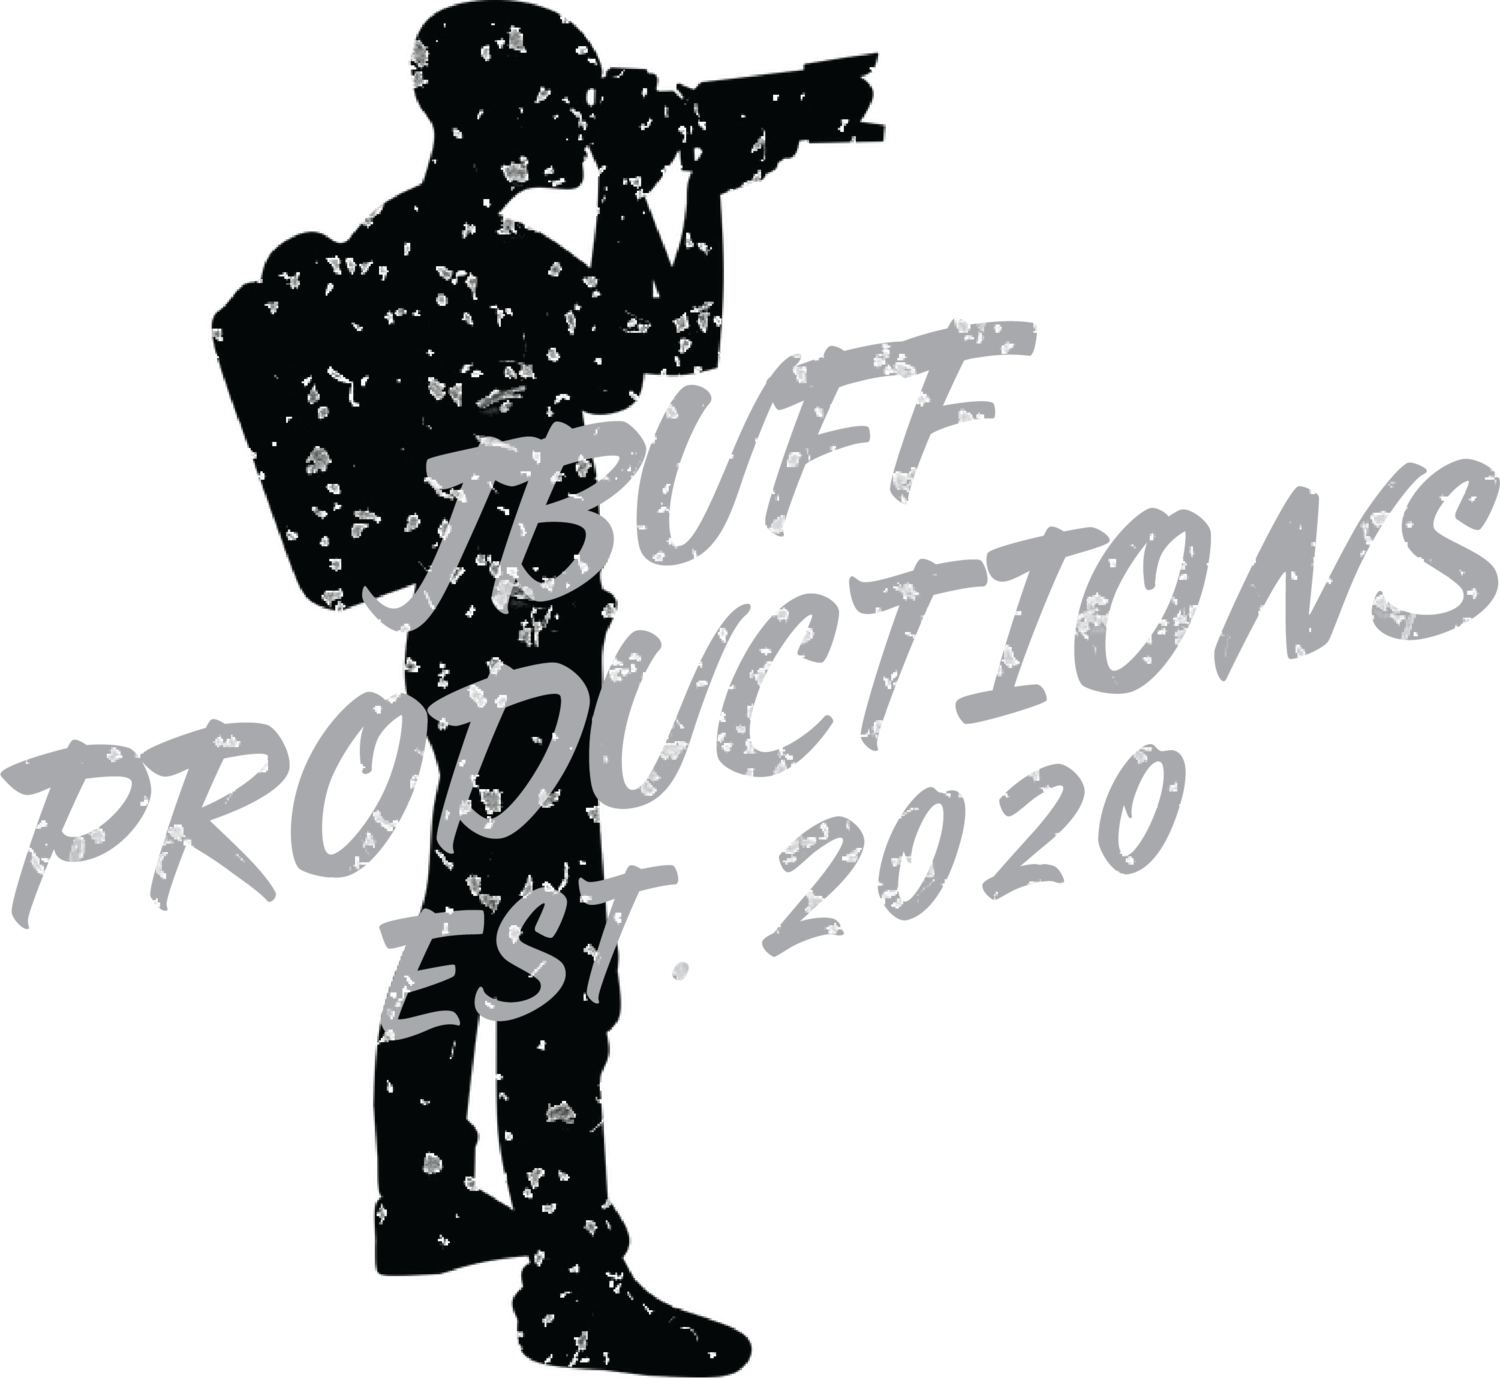 About — JBuff Productions